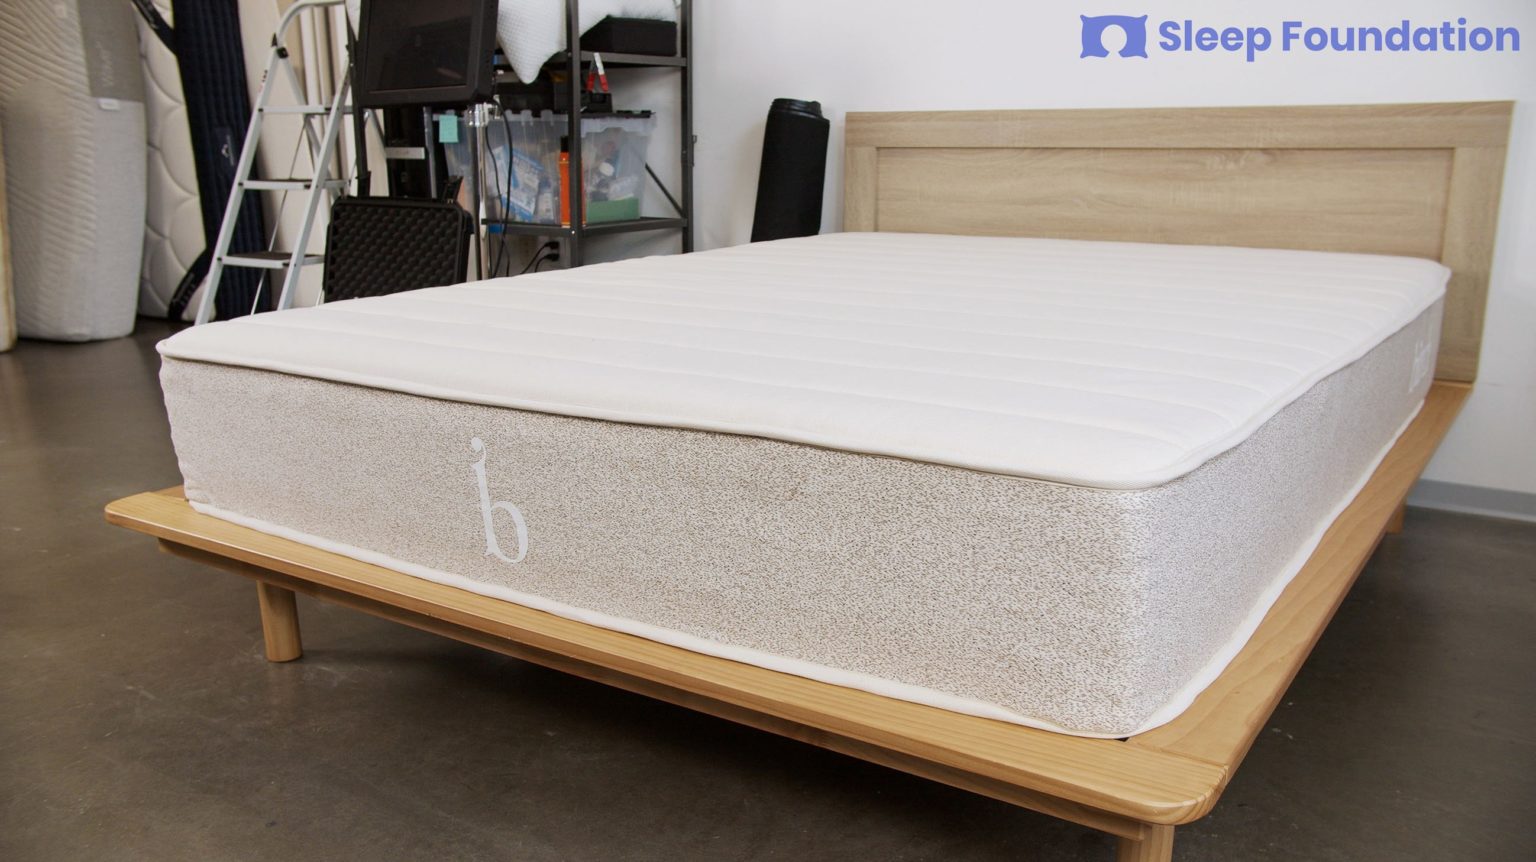 A picture of the Birch Mattress in Sleep Foundation's test lab.